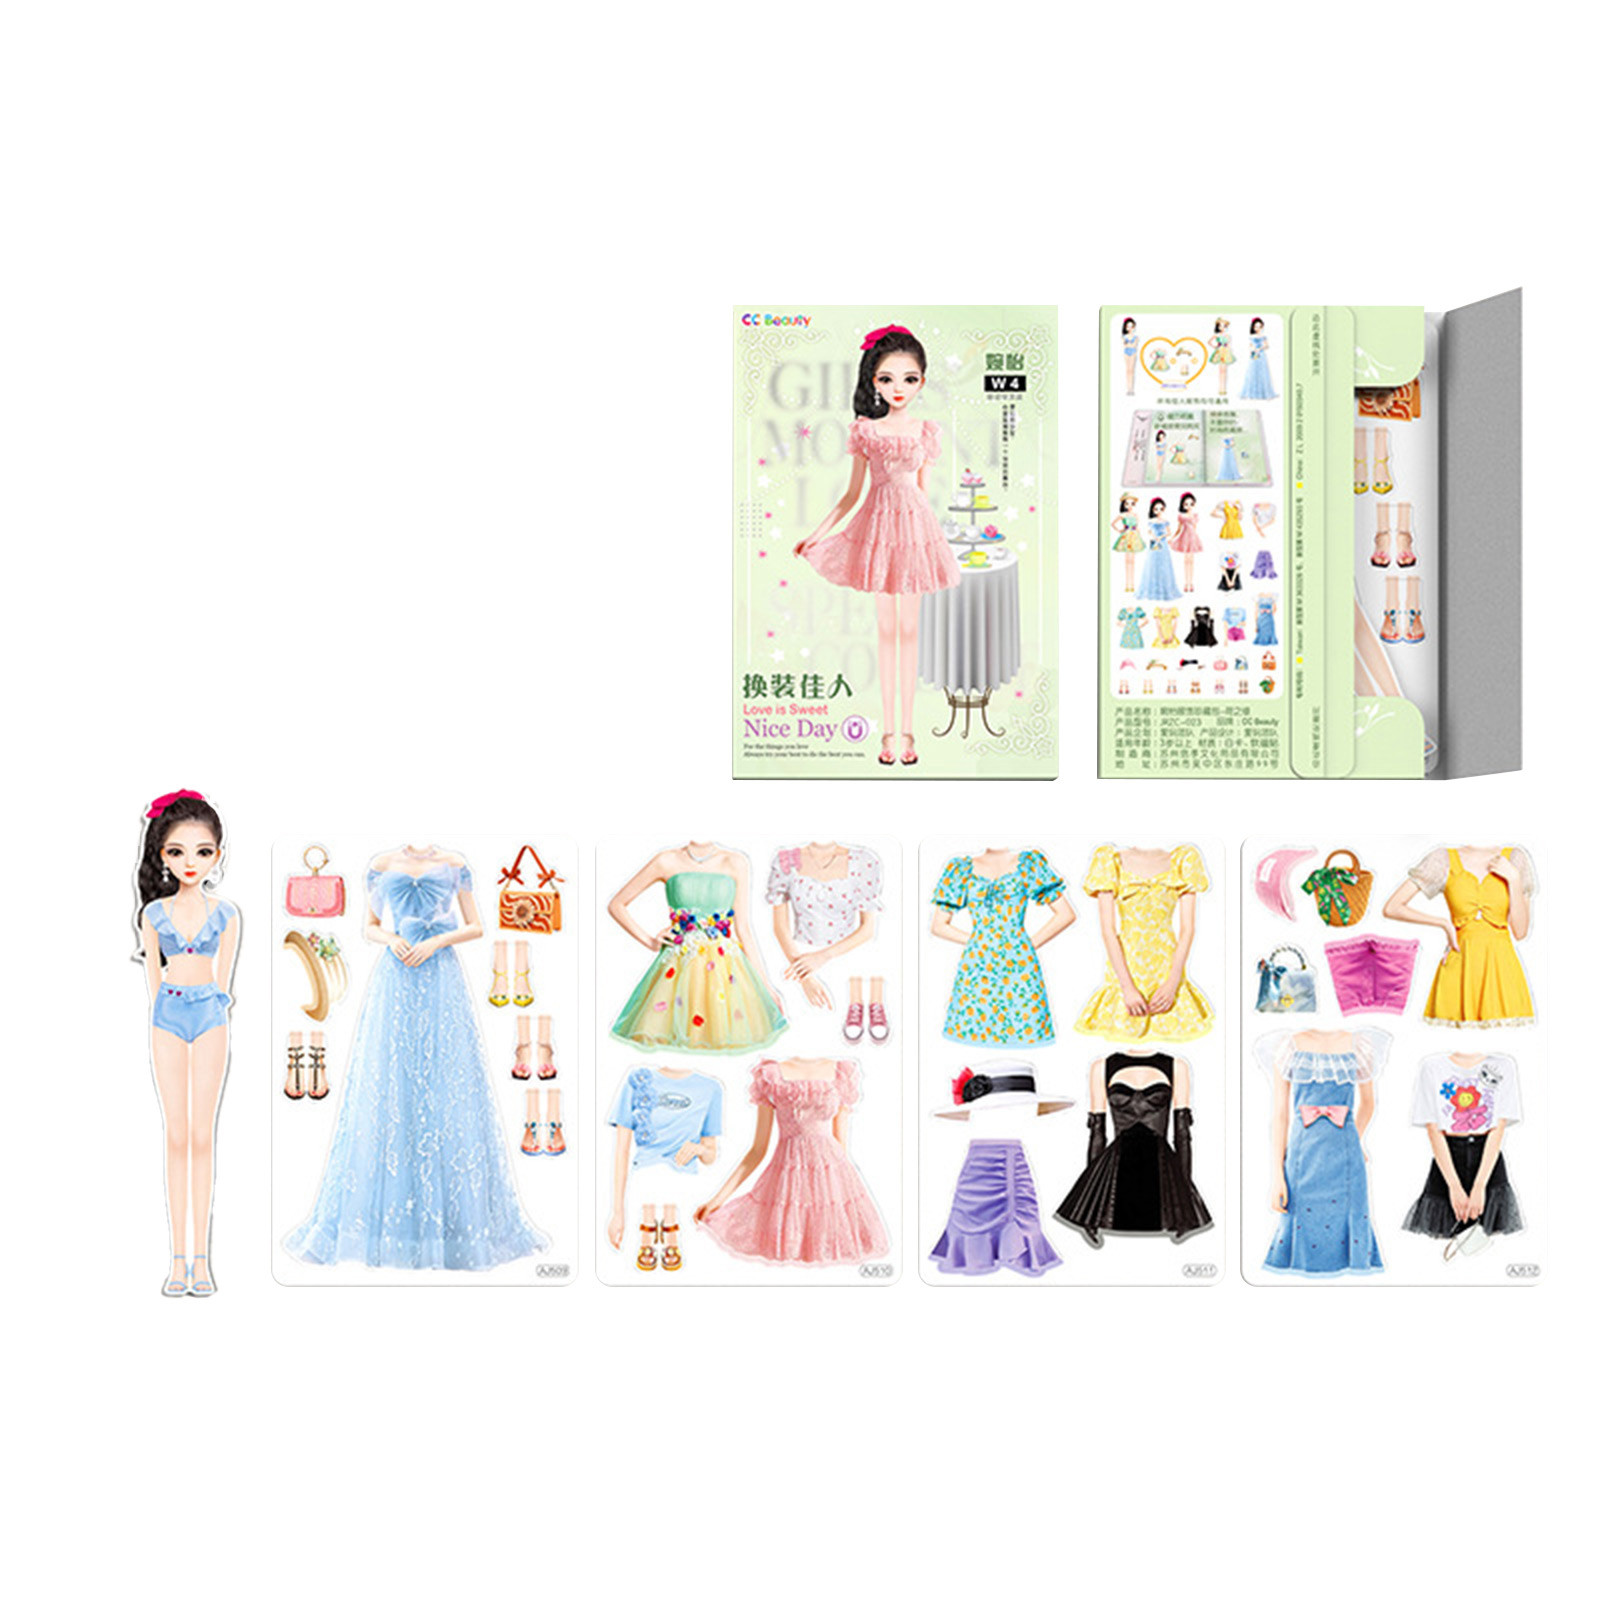 Loyerfyivos Magnetic Princess Dress Up Paper Doll Pretend Play Game, Travel Toys Car Road Trip,Magnet Clothes Puzzles for Kids Toddler Girls,Preschool Learning Created Imagine Set Birthday Gift - image 3 of 6